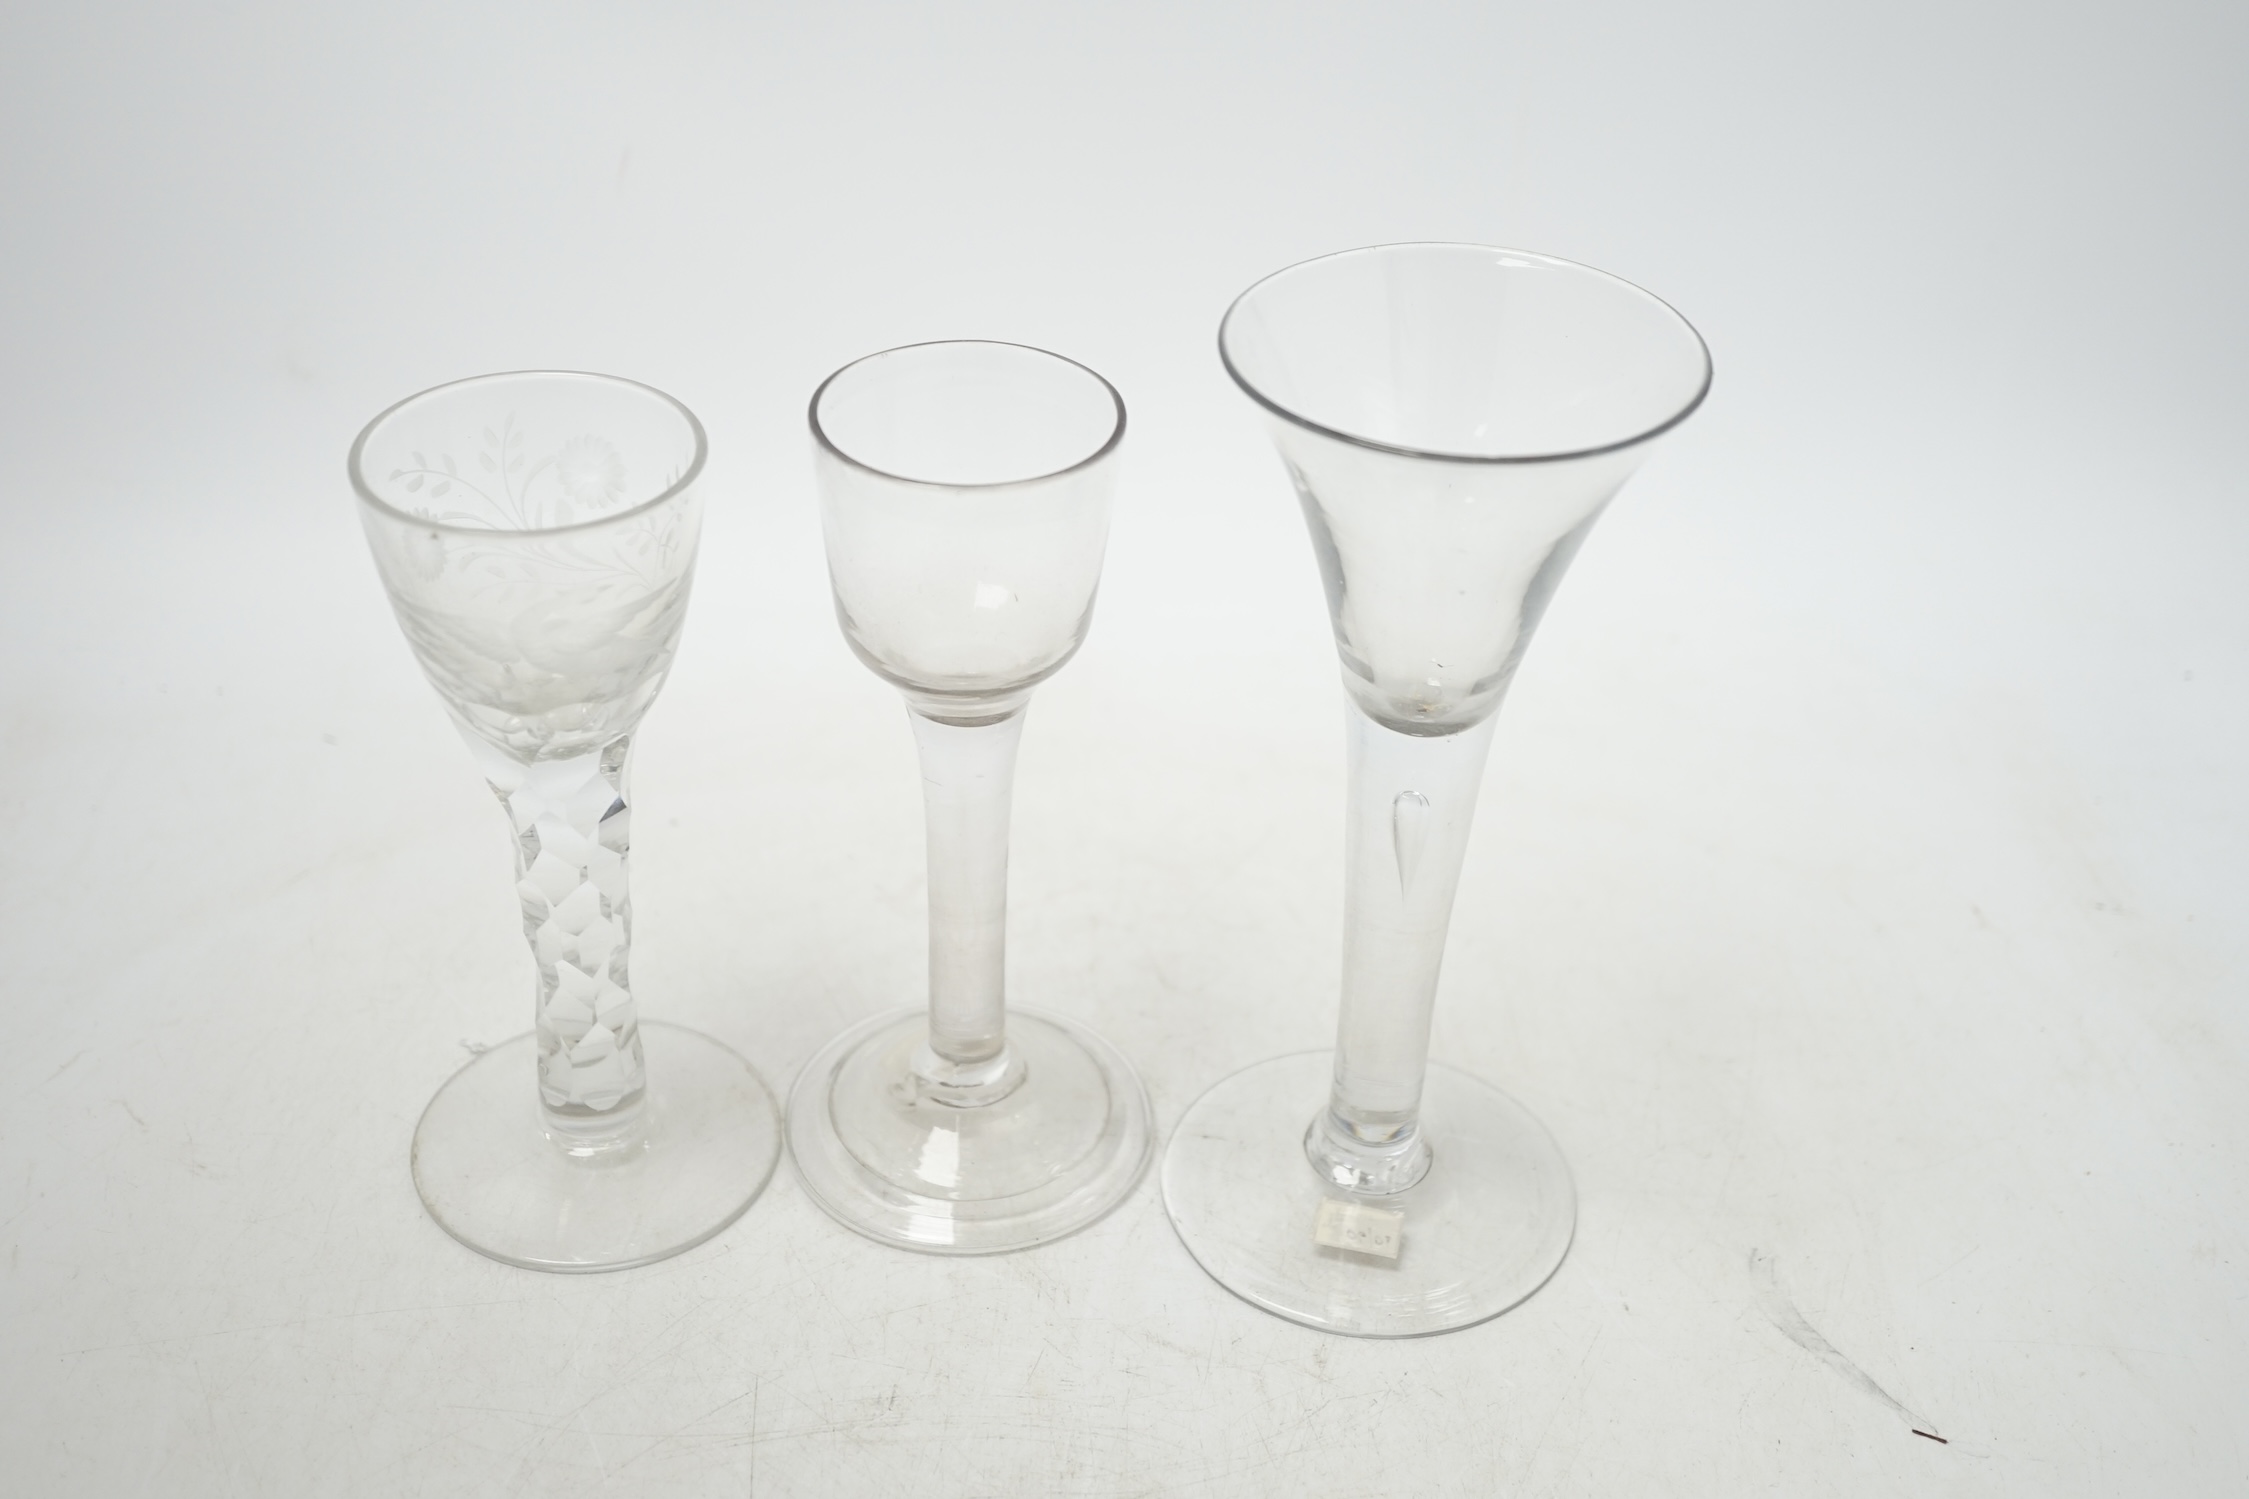 Three 18th century wine glasses; a drawn trumpet glass, another with a bell shaped bowl and folded foot and an engraved glass with a faceted stem, tallest 16.5cm. Condition - good